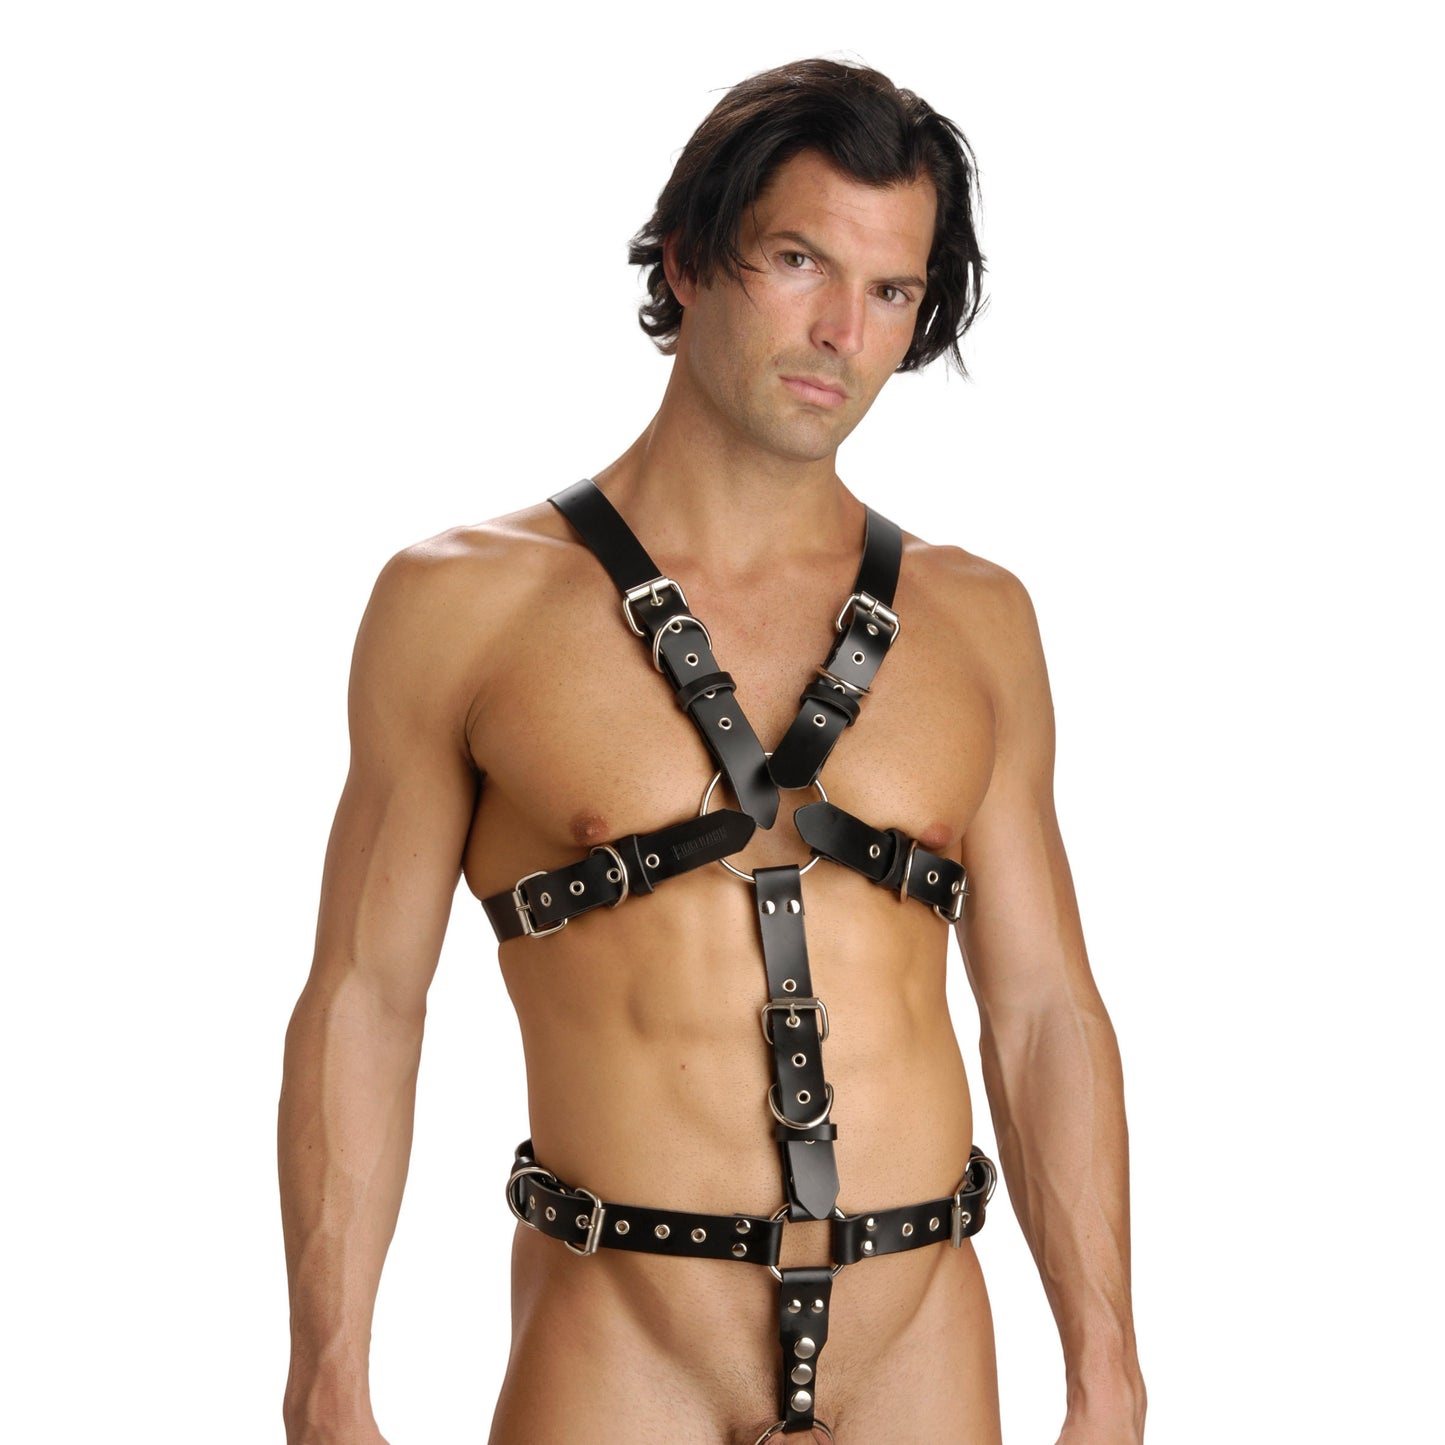 Strict Leather Body Harness with Cock Ring - Medium Large - UABDSM